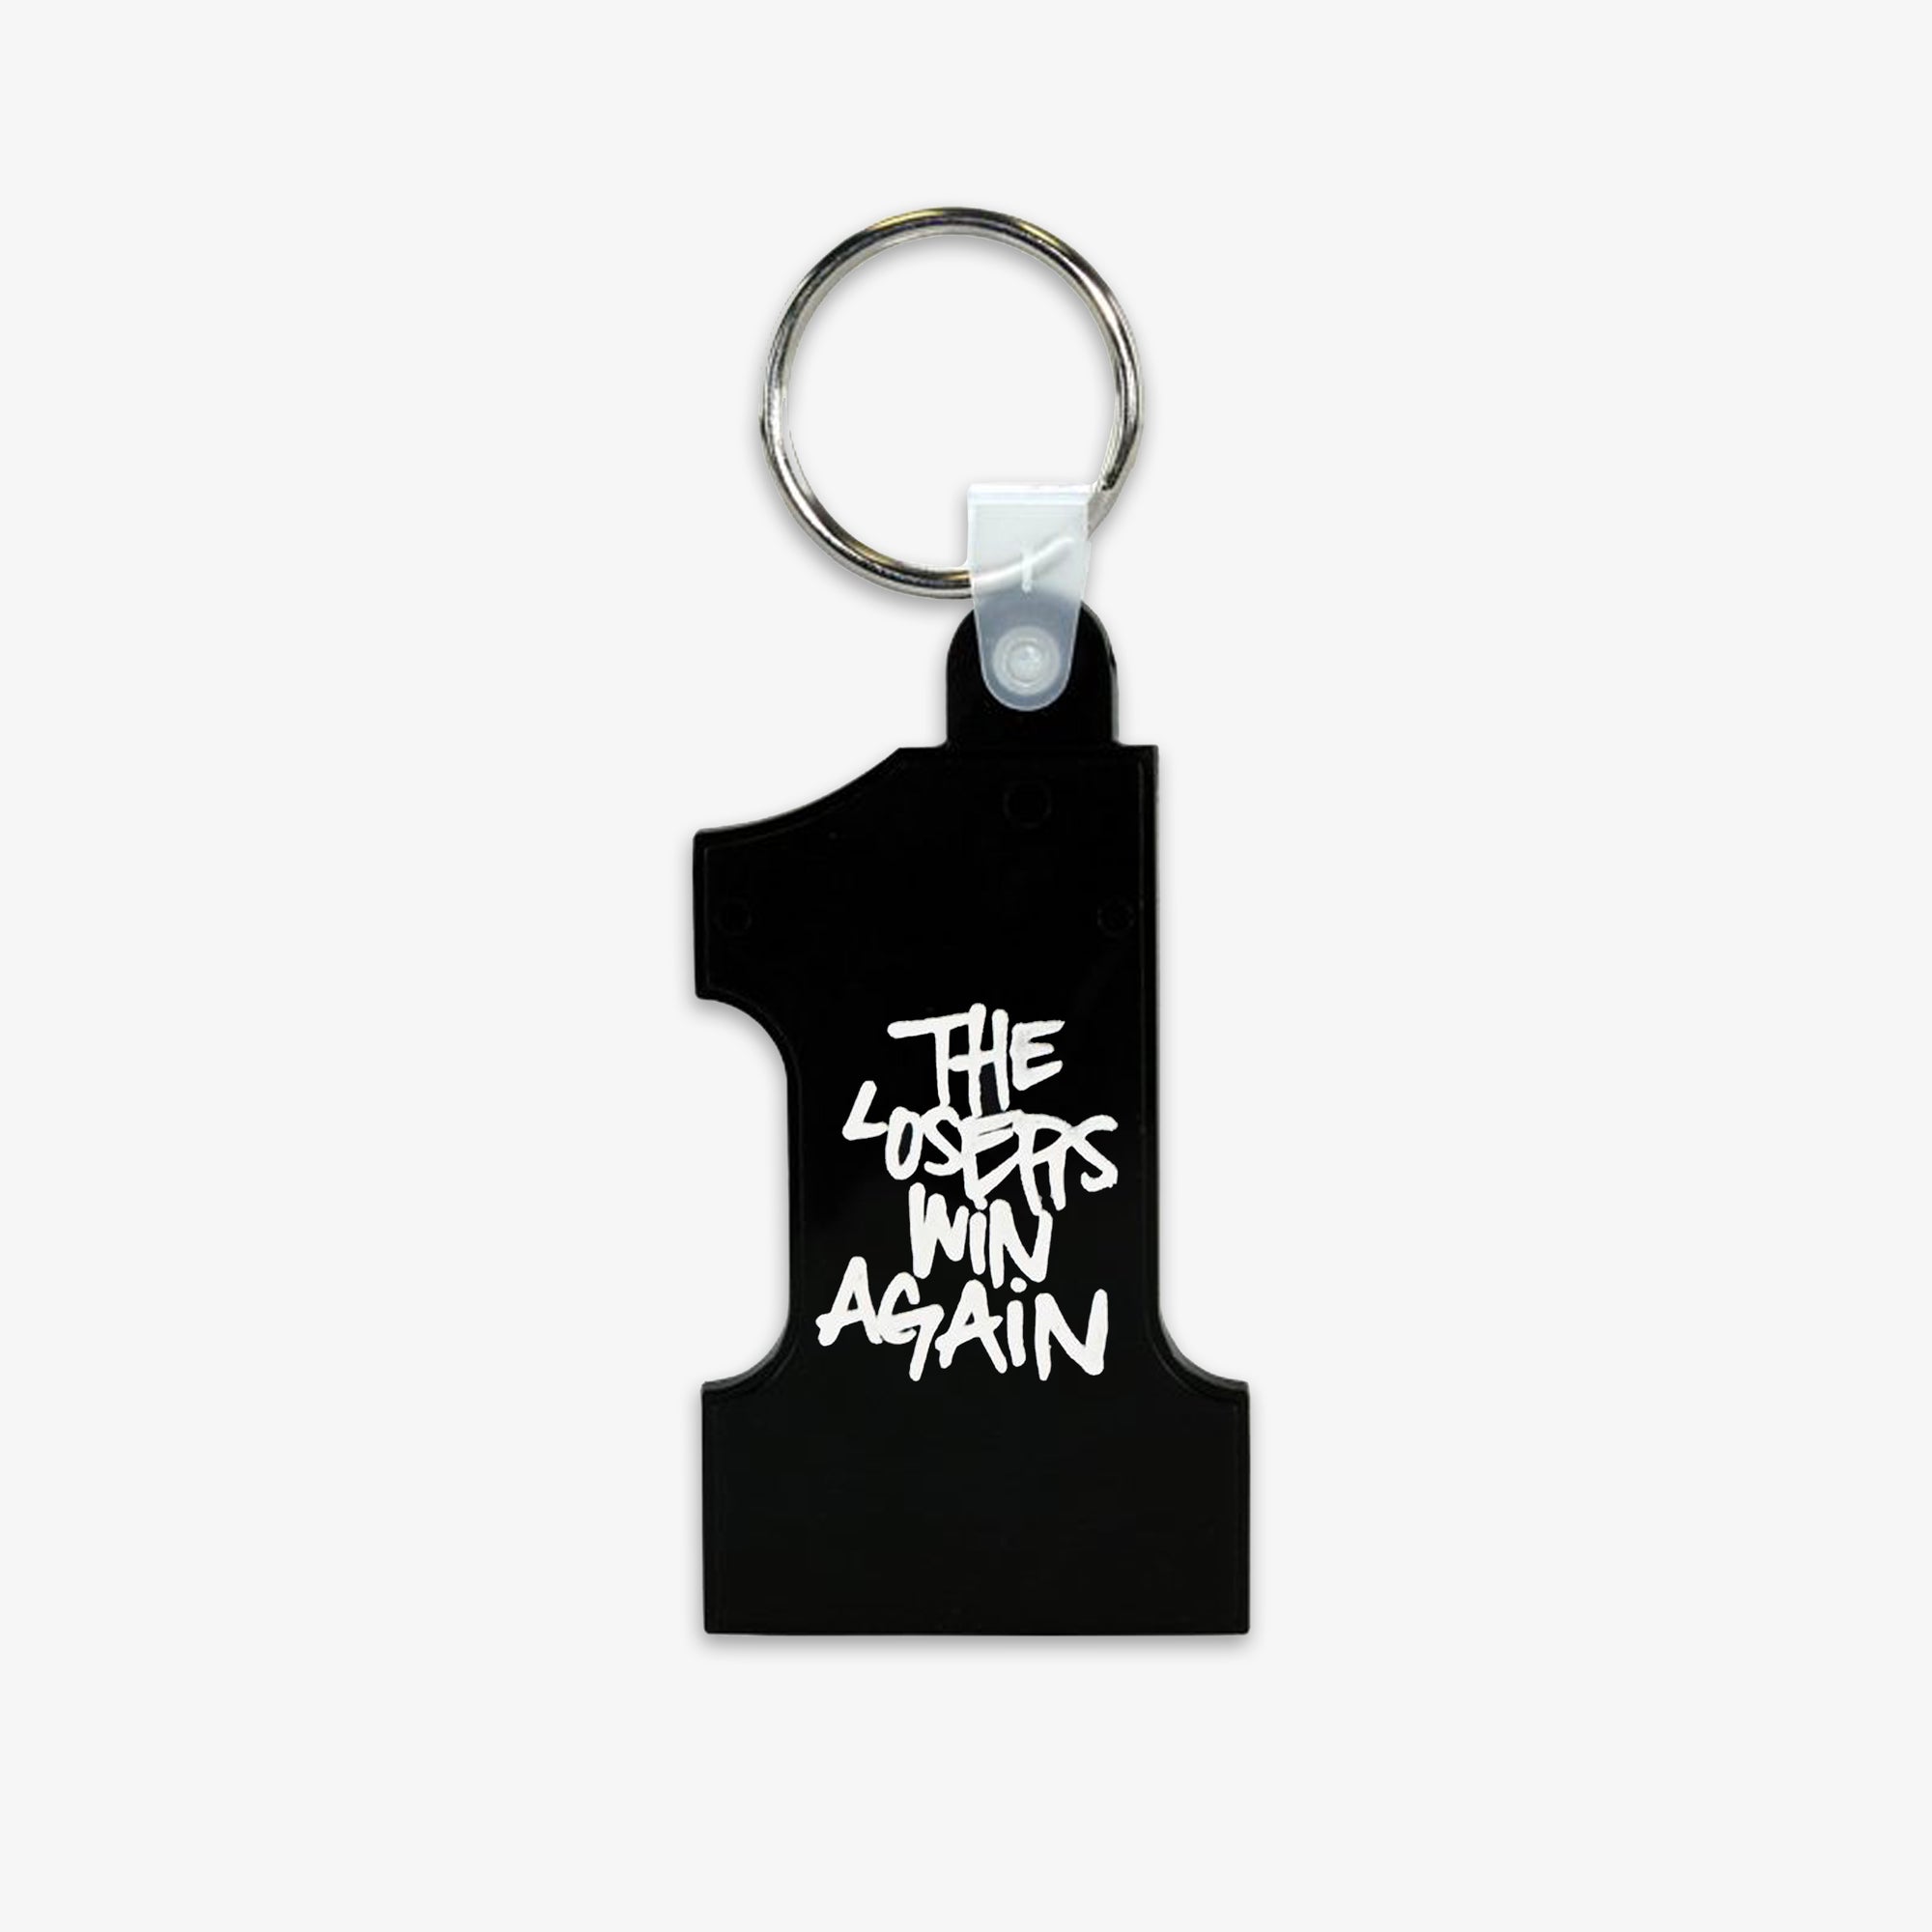 #1 LOSERS KEYCHAIN